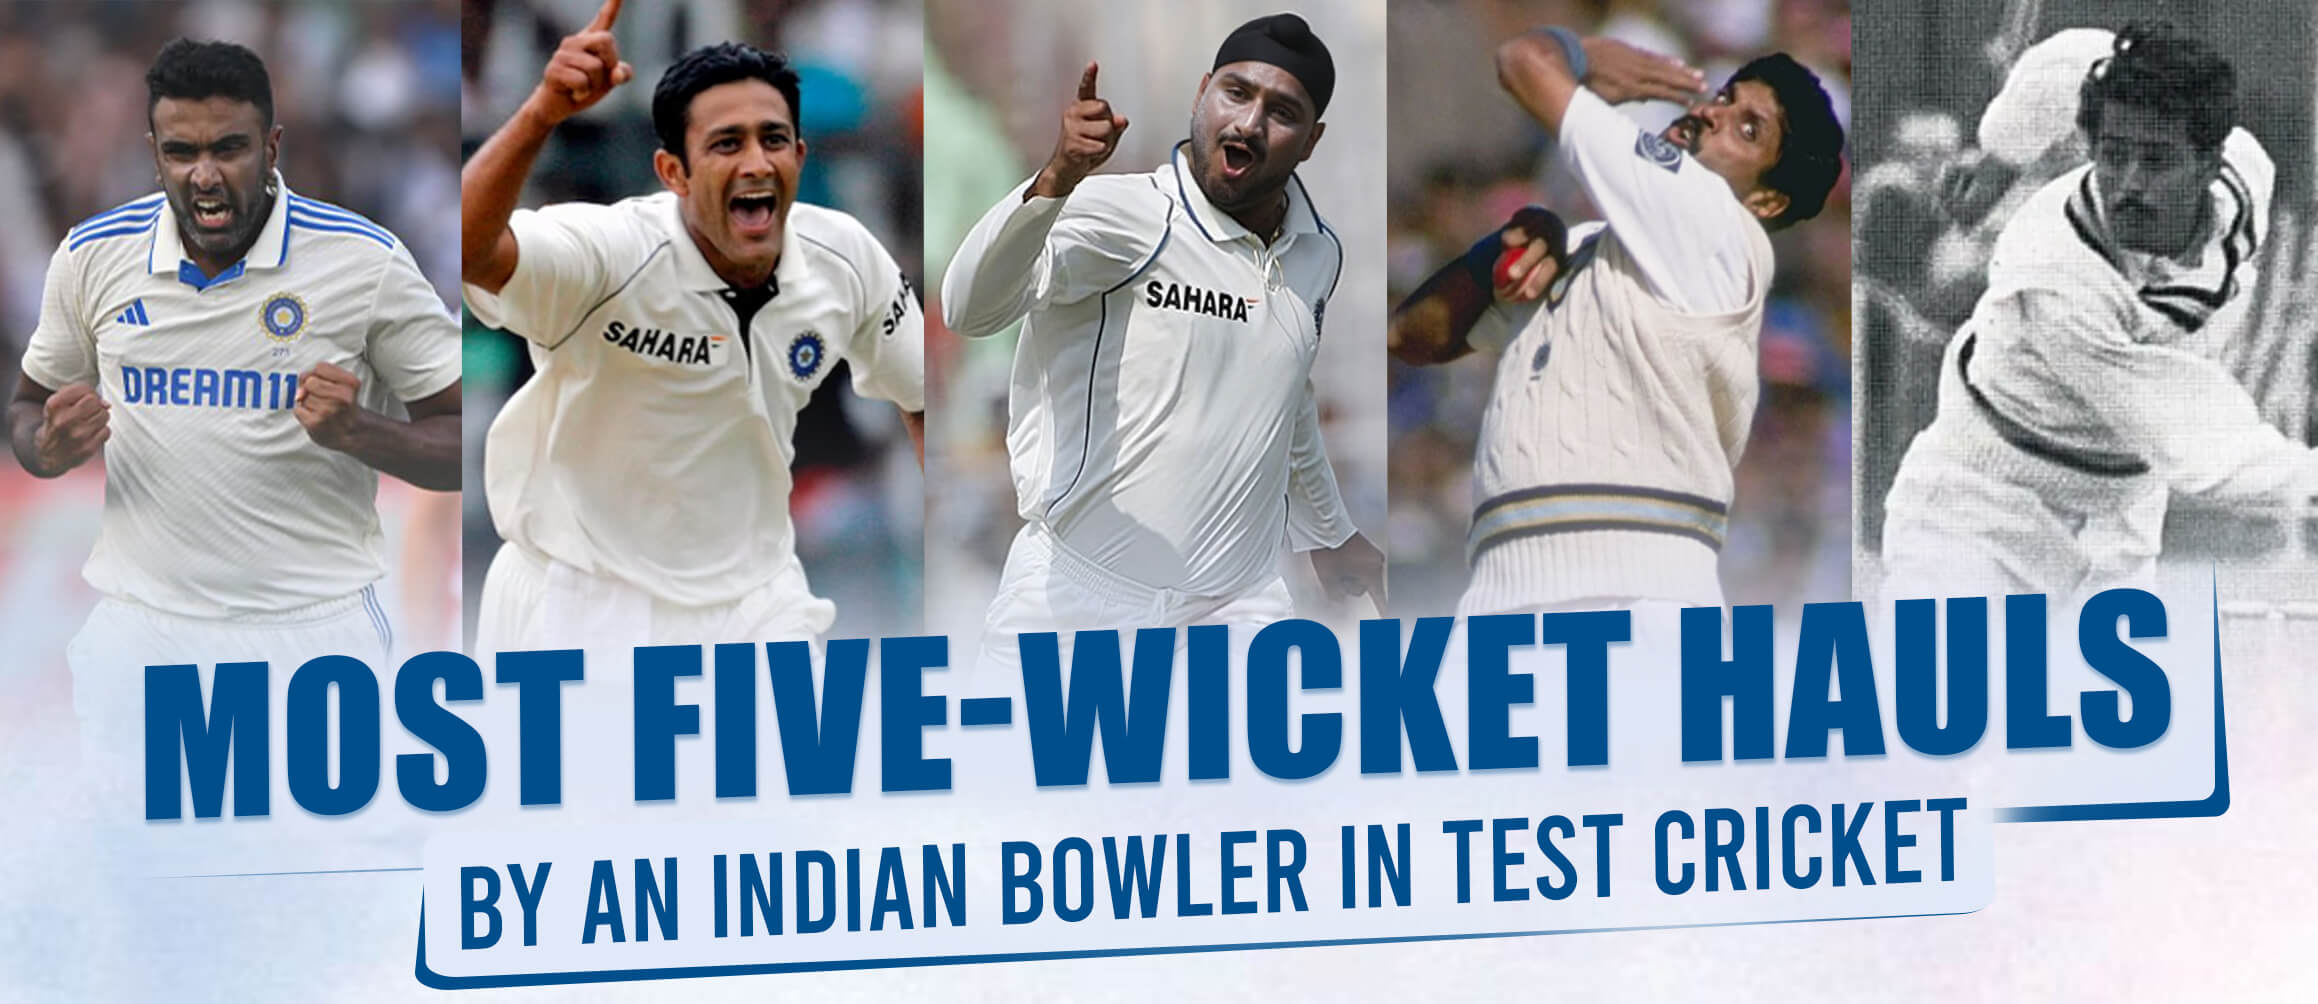 Most Five-Wicket Hauls by an Indian Bowler in Test Cricket